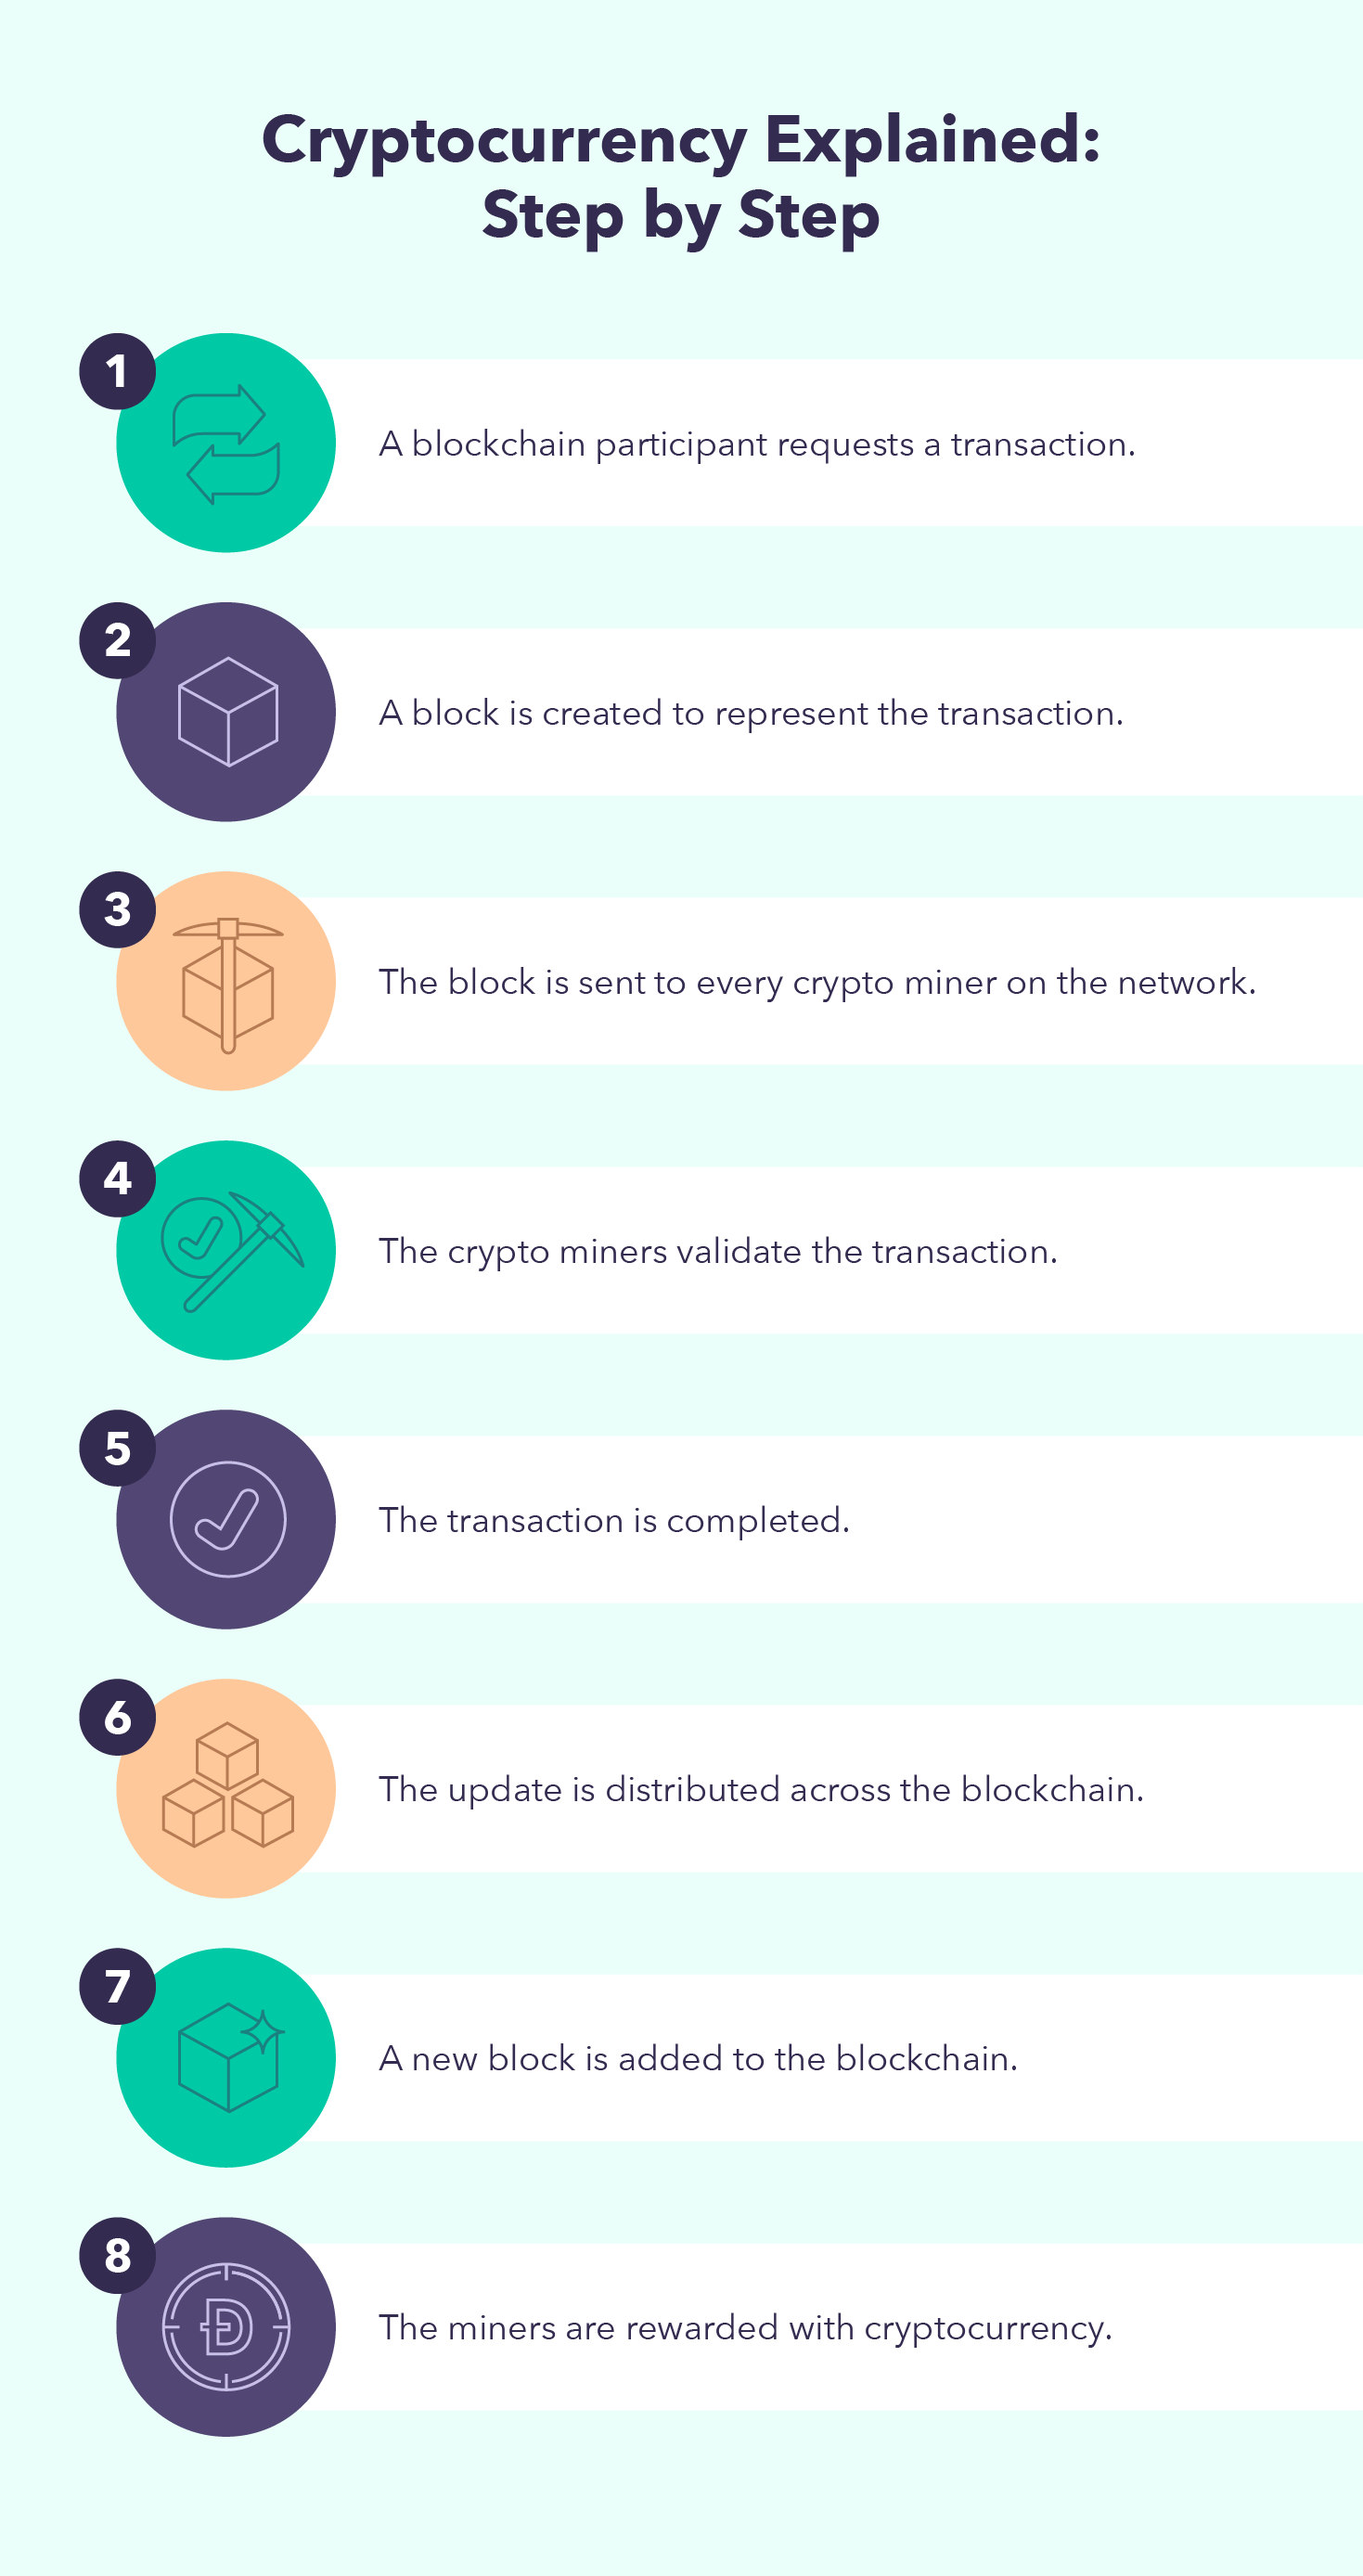 A graphic lists 9 steps underscoring how cryptocurrency works, ultimately answering the question “how does cryptocurrency work?”